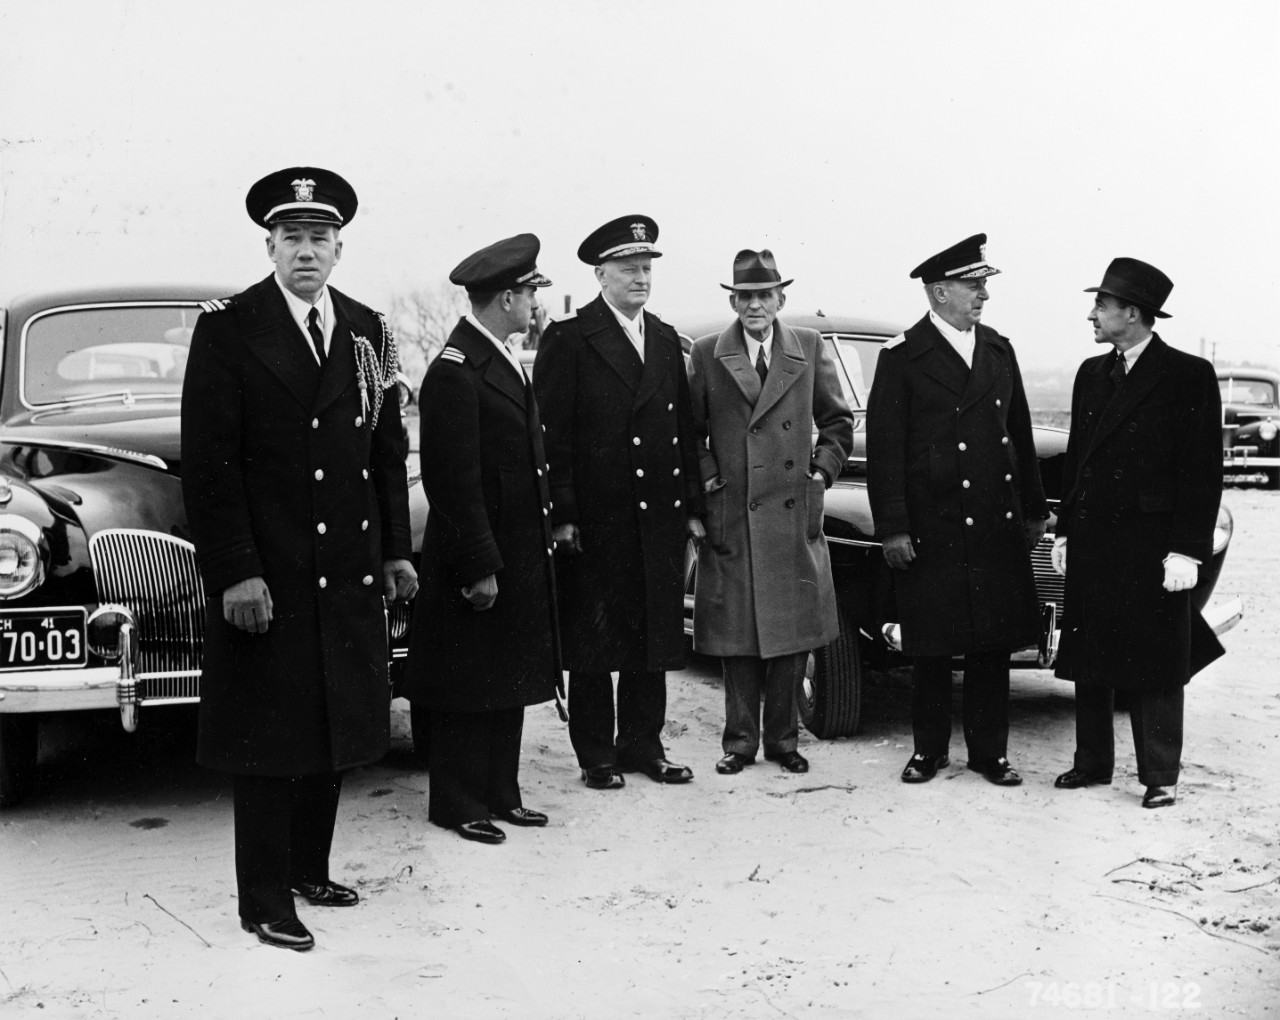 Rear Admiral Chester Nimitz, Chief of BuNav (third from left) visits Mr. Henry Ford at his River Rouge Plant. Rear Admiral John Downes, COM NINE Great Lakes, Illinois, is 2nd from right. Date was 1941.